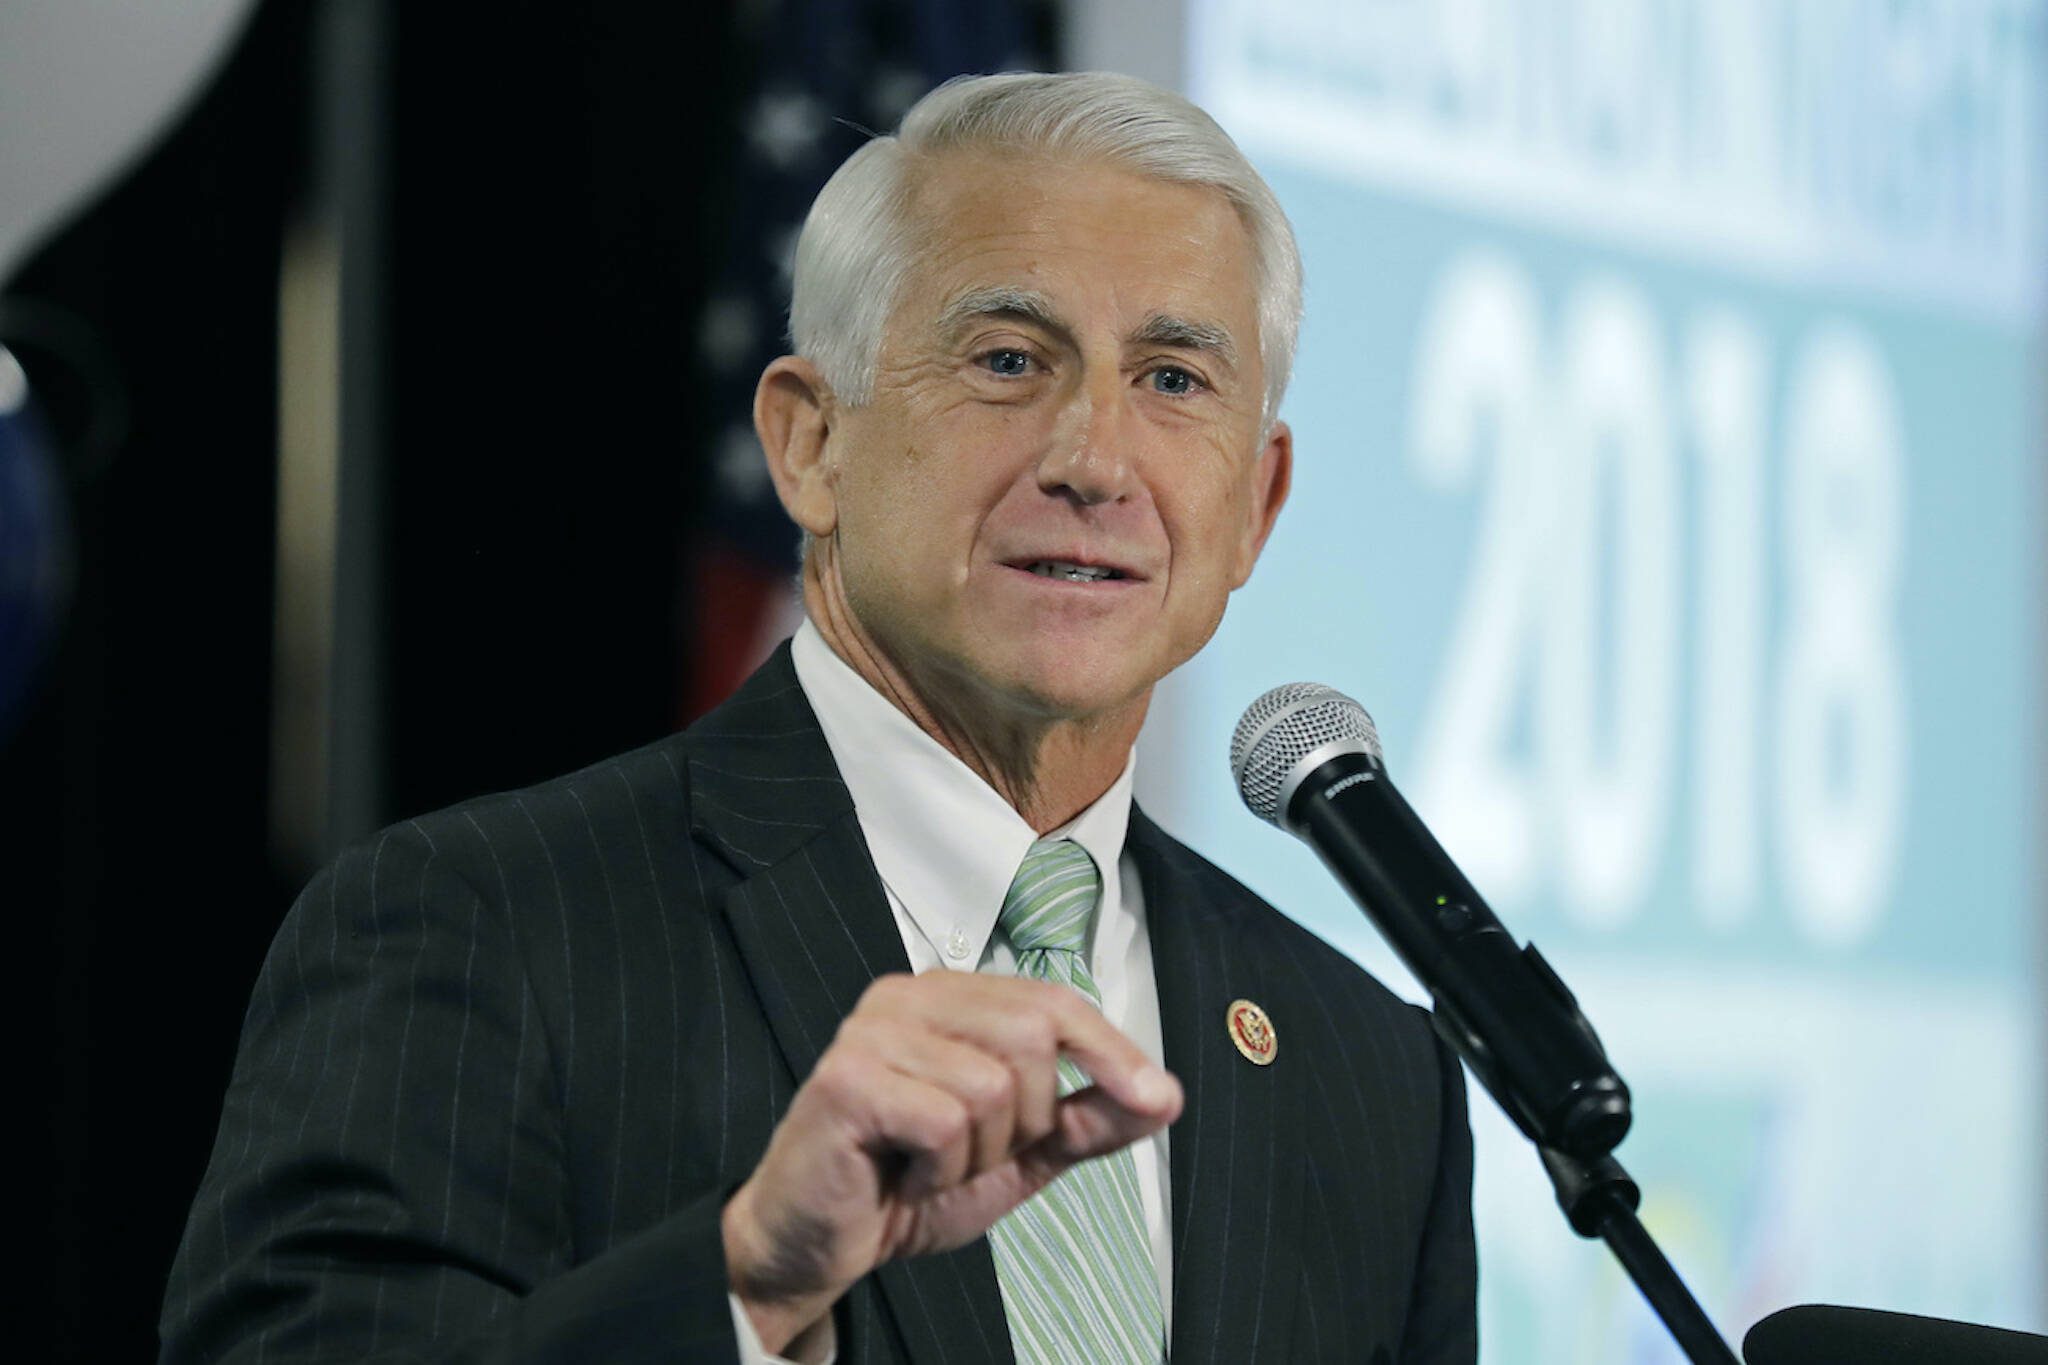 Then-Rep. Dave Reichert, R-Wash., speaks on Nov. 6, 2018, at a Republican party election night gathering in Issaquah, Wash. Reichert filed campaign paperwork with the state Public Disclosure Commission on Friday, June 30, 2023, to run as a Republican candidate. (AP Photo/Ted S. Warren, File)